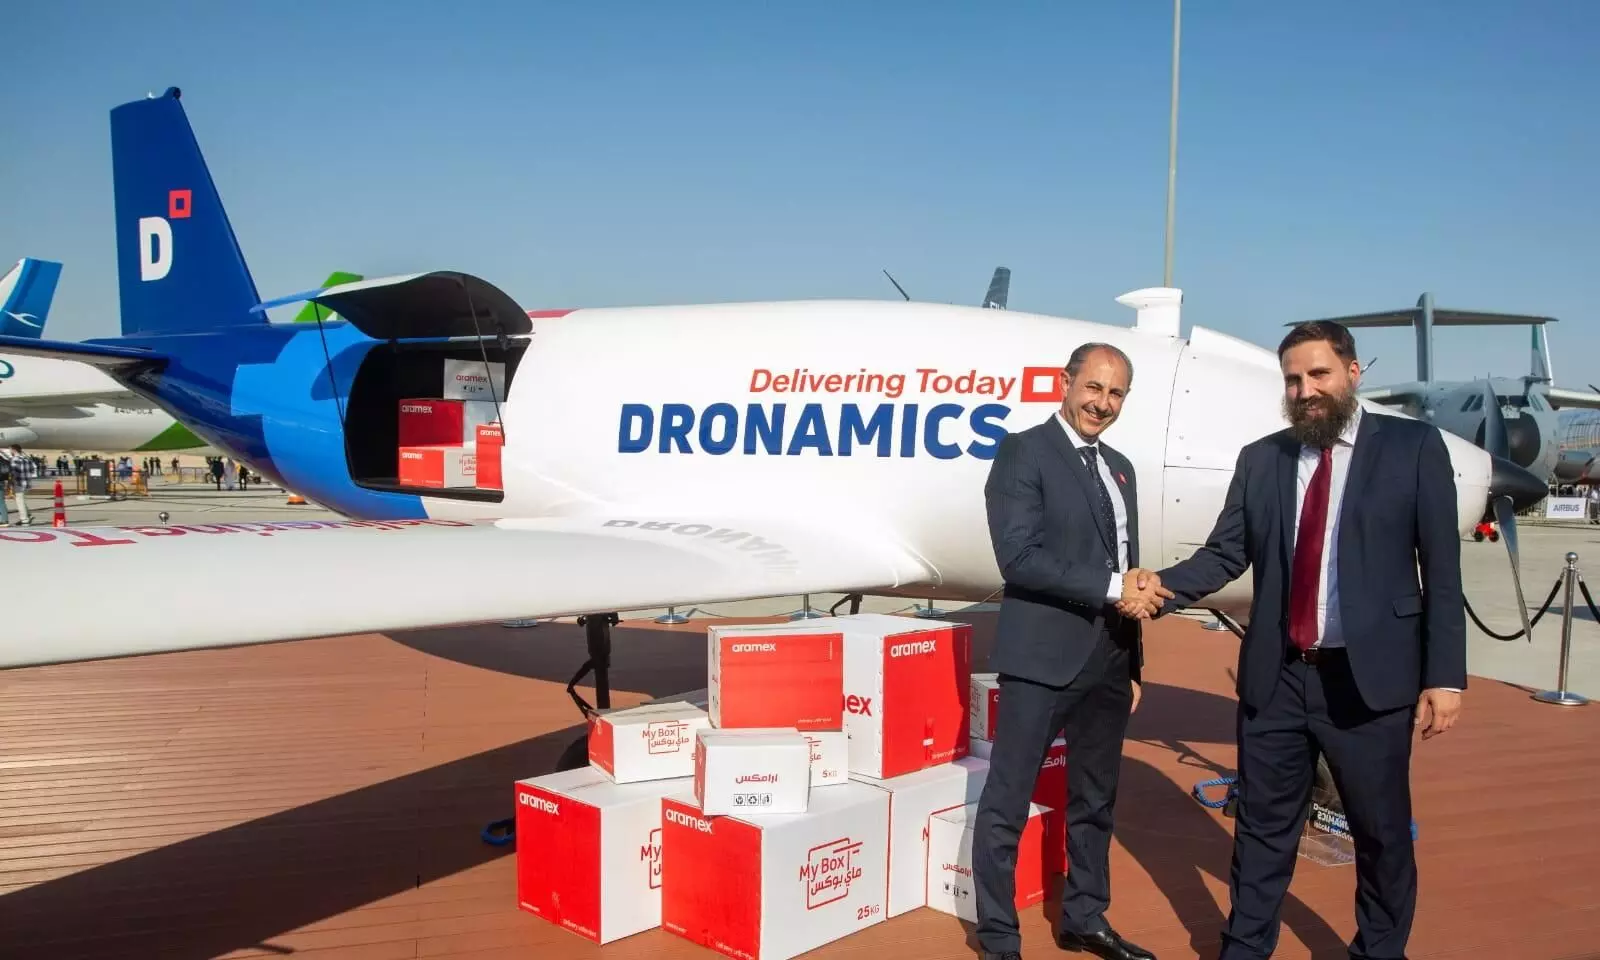 Dronamics, Aramex to partner on cargo drone deliveries globally